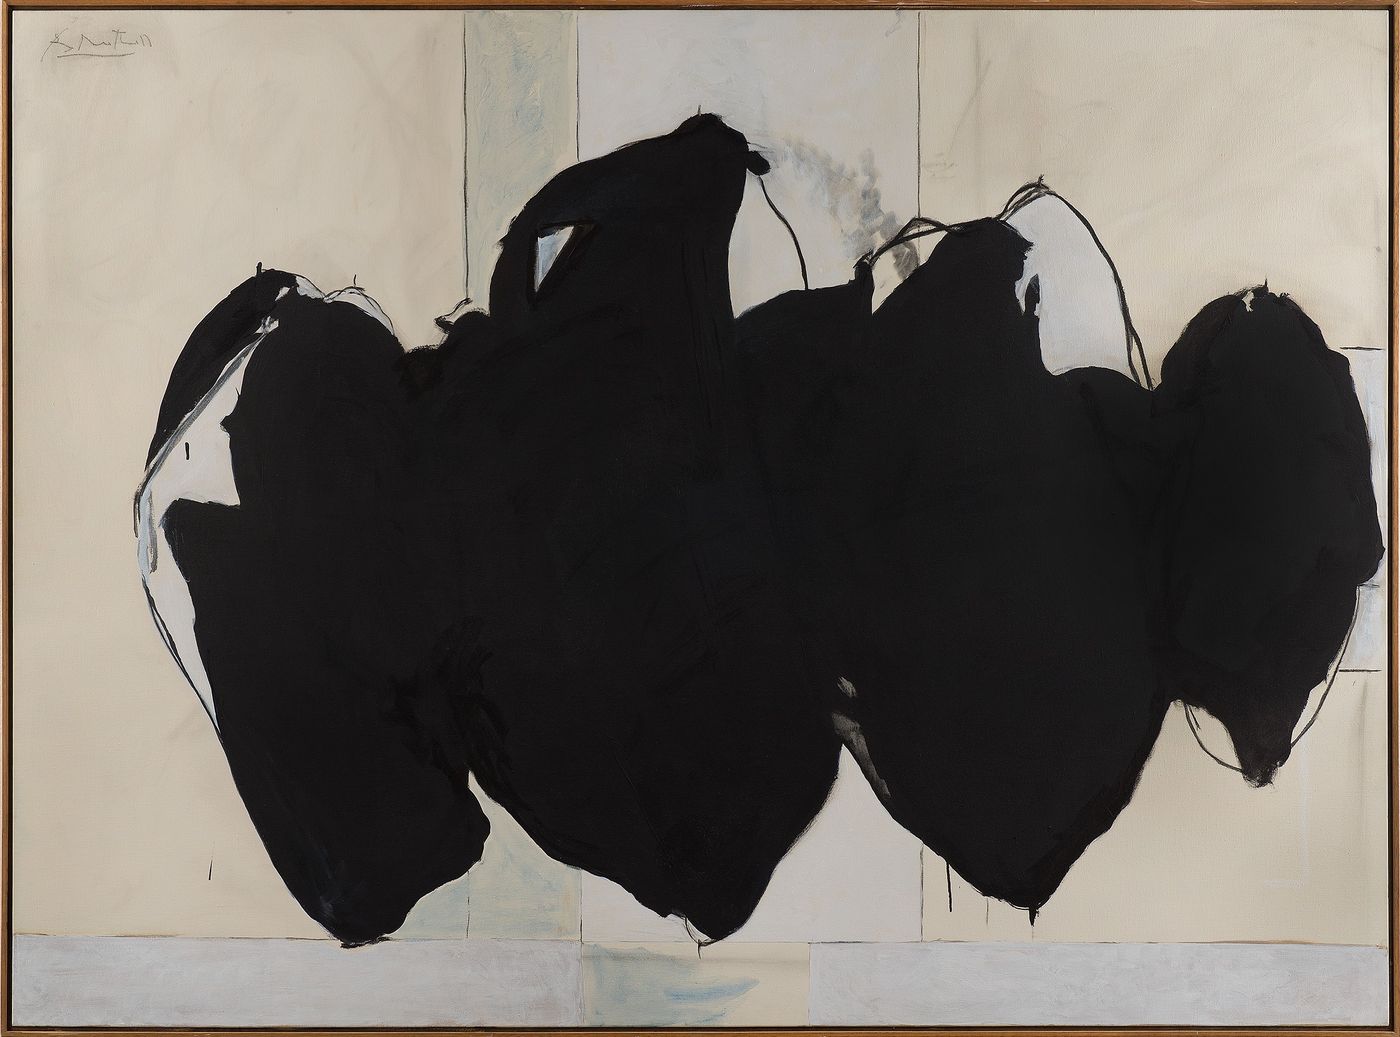 PHILLIPS : First Reveal: Robert Motherwell On View at the Box